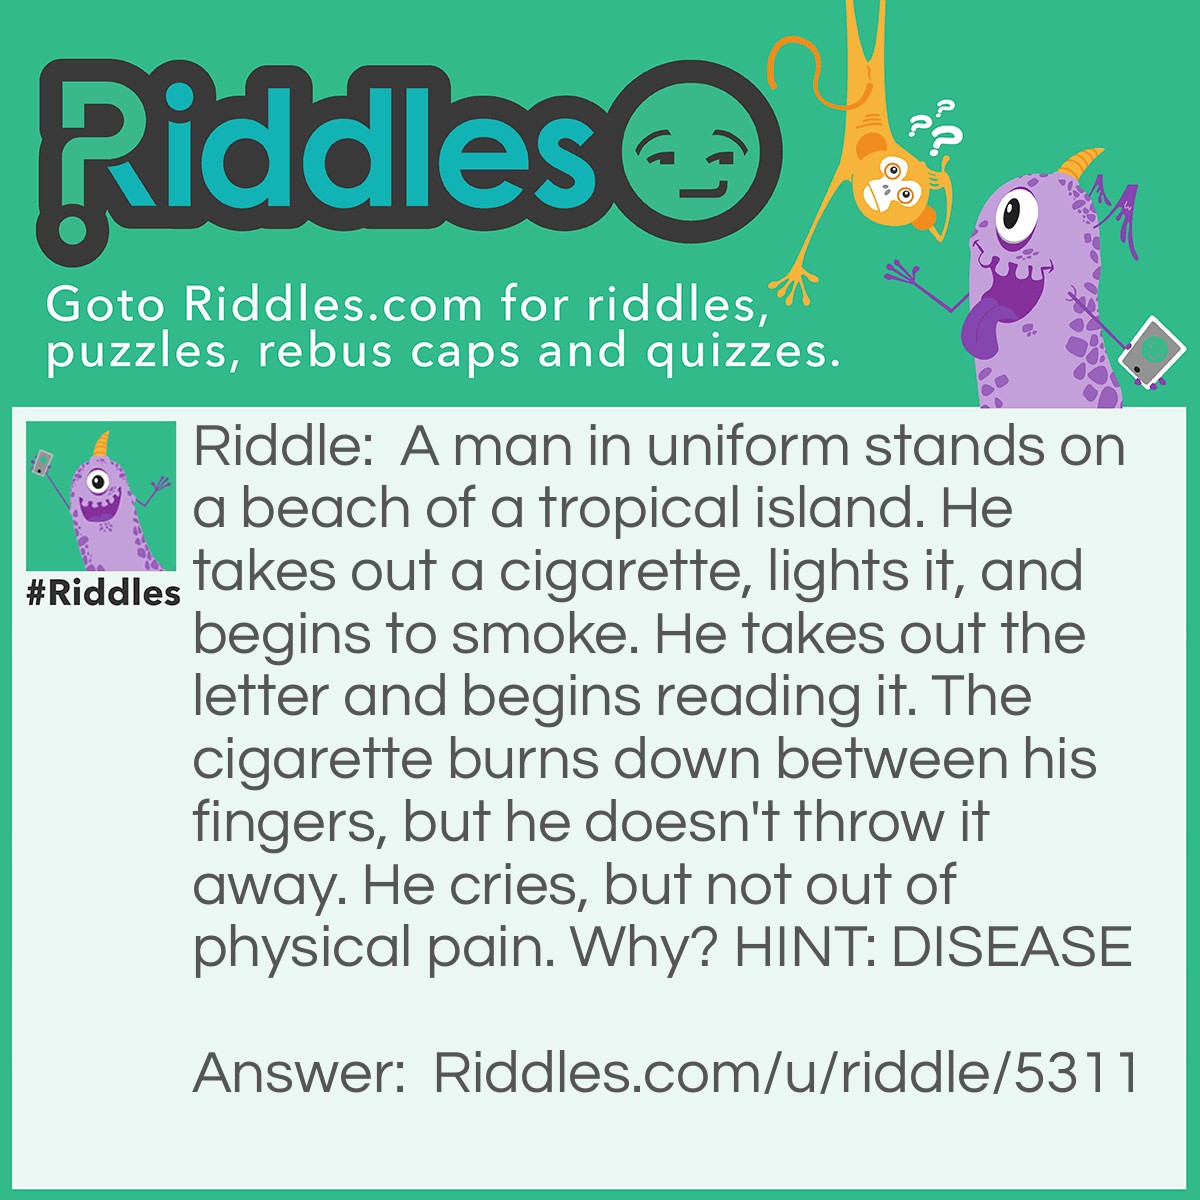 Riddle: A man in uniform stands on a beach of a tropical island. He takes out a cigarette, lights it, and begins to smoke. He takes out the letter and begins reading it. The cigarette burns down between his fingers, but he doesn't throw it away. He cries, but not out of physical pain. Why? HINT: DISEASE Answer: He is a guard/attendant in a leper colony. The letter to him informs the person that he has contracted the disease. The key to figure it out was the cigarette that burned down beteen his fingers. Leprosy can kill off sensory nerves without destroying motor abilities..